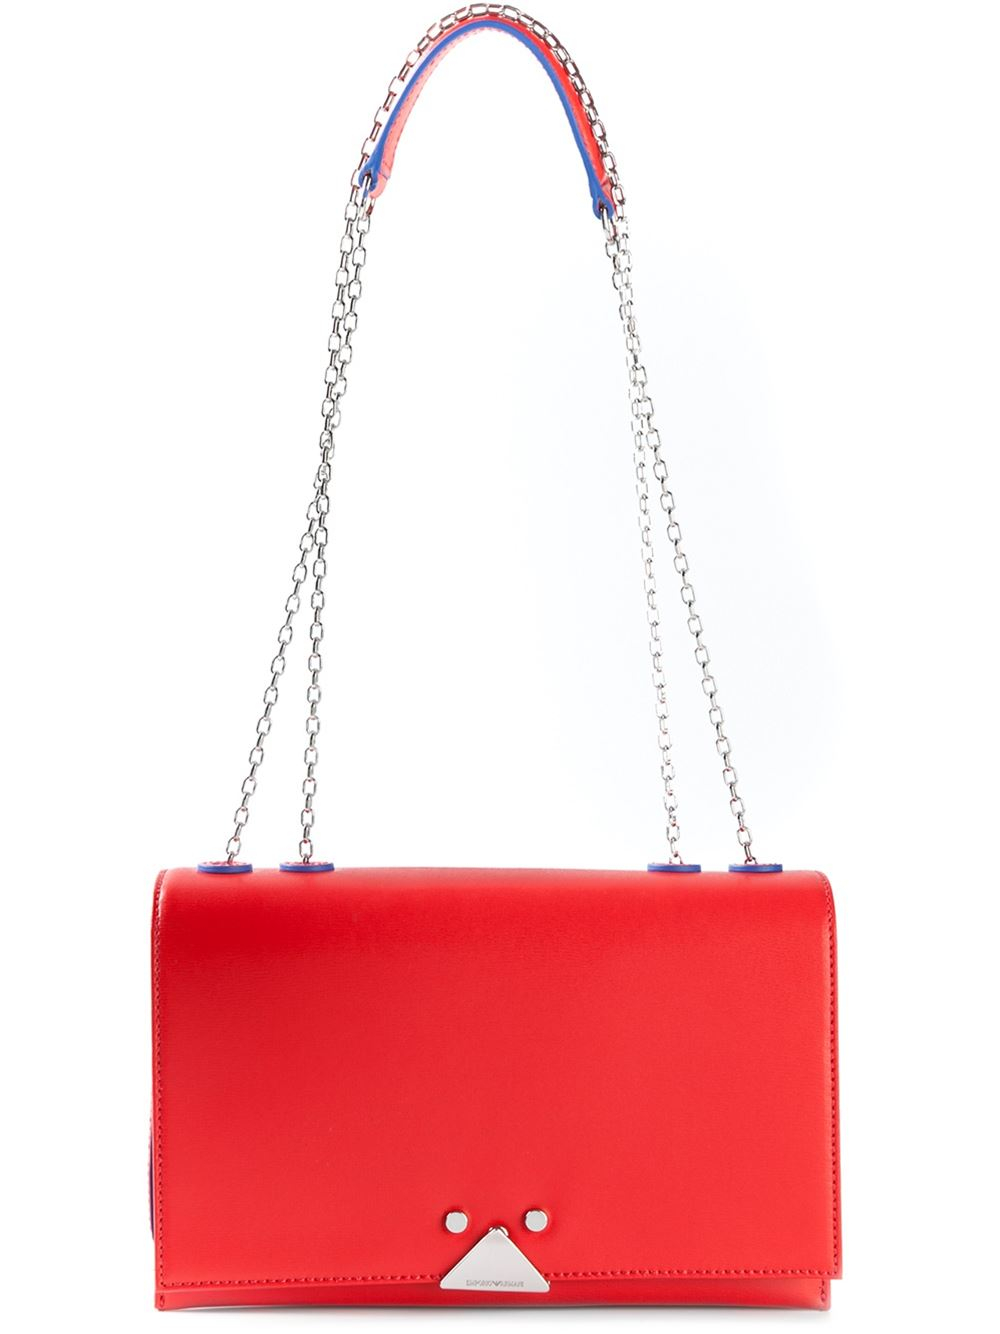 Lyst - Emporio Armani Double Chain Shoulder Bag in Red